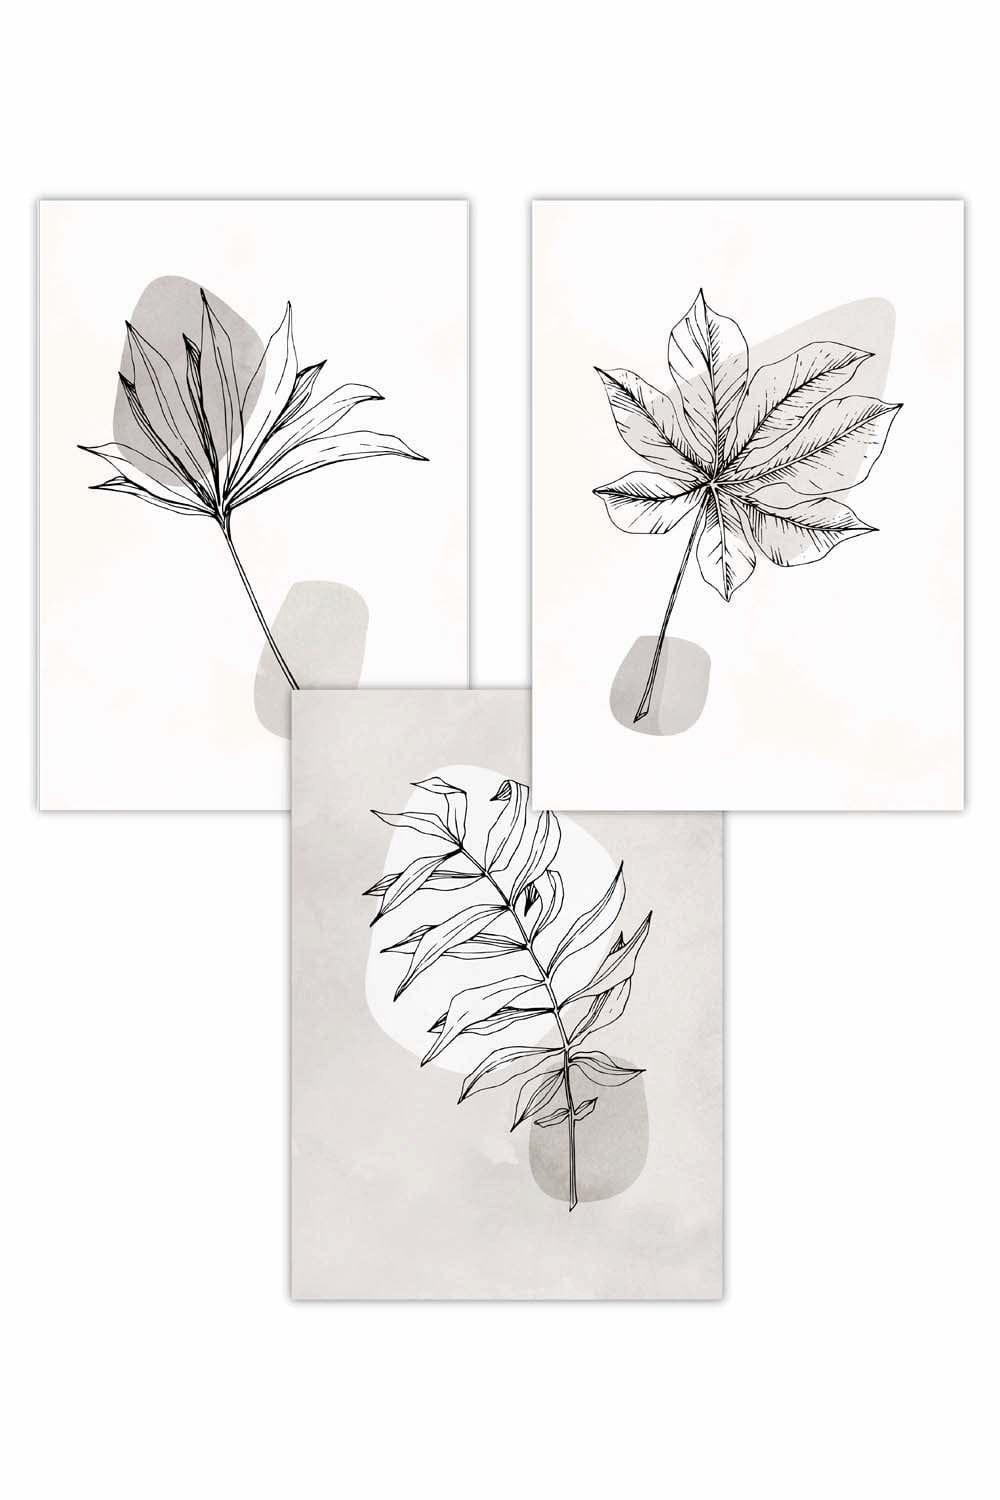 Set of 3 Grey and Beige Botanical Sketch Leaves Art Posters